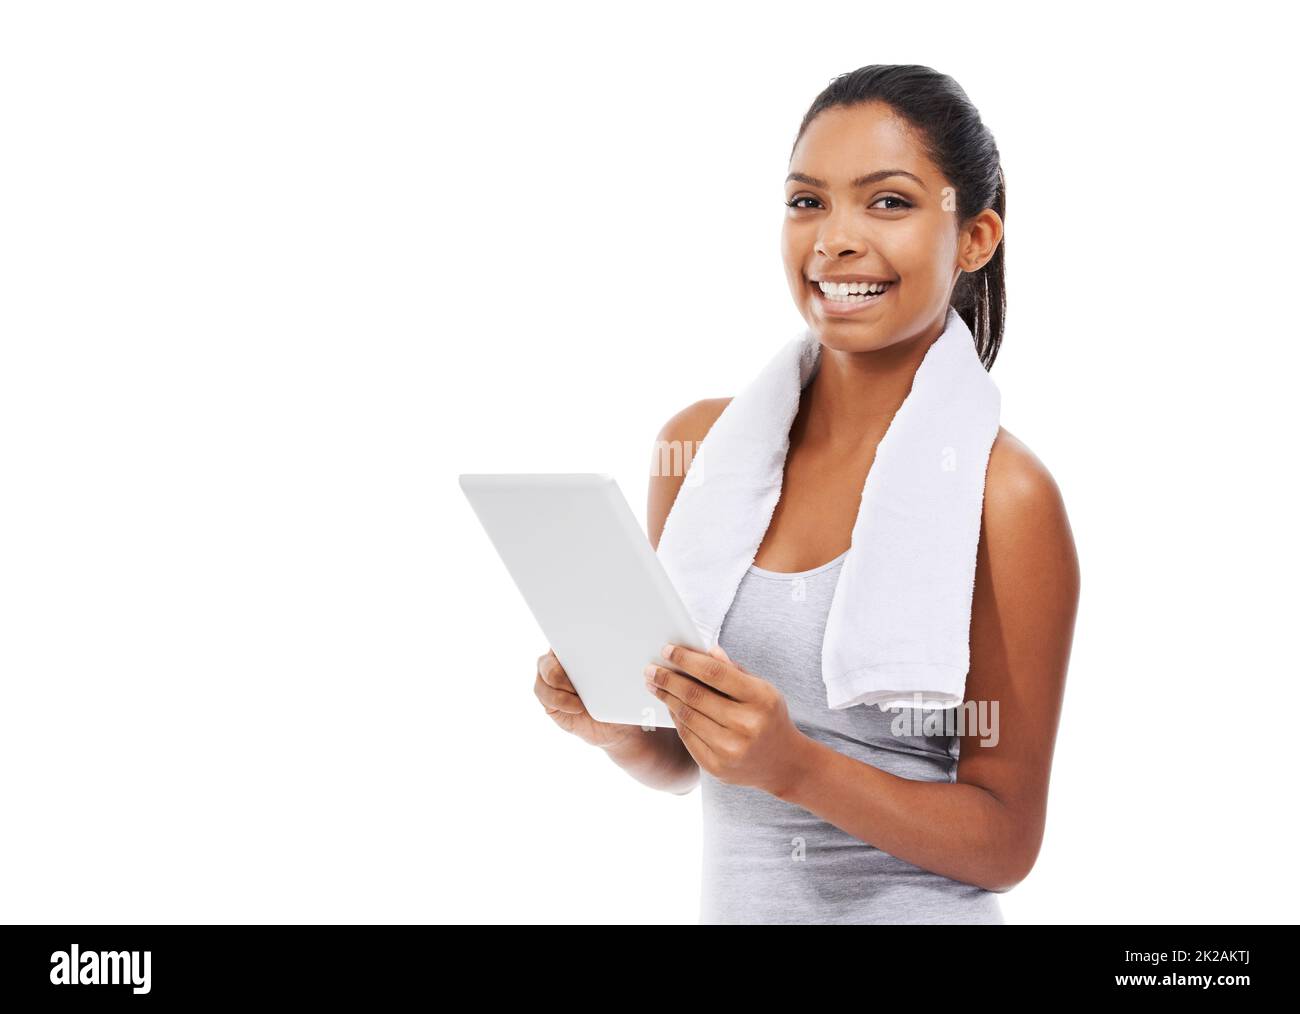 Using her tablet to monitor her fitness. A young woman in gym clothes working on a digital tablet. Stock Photo